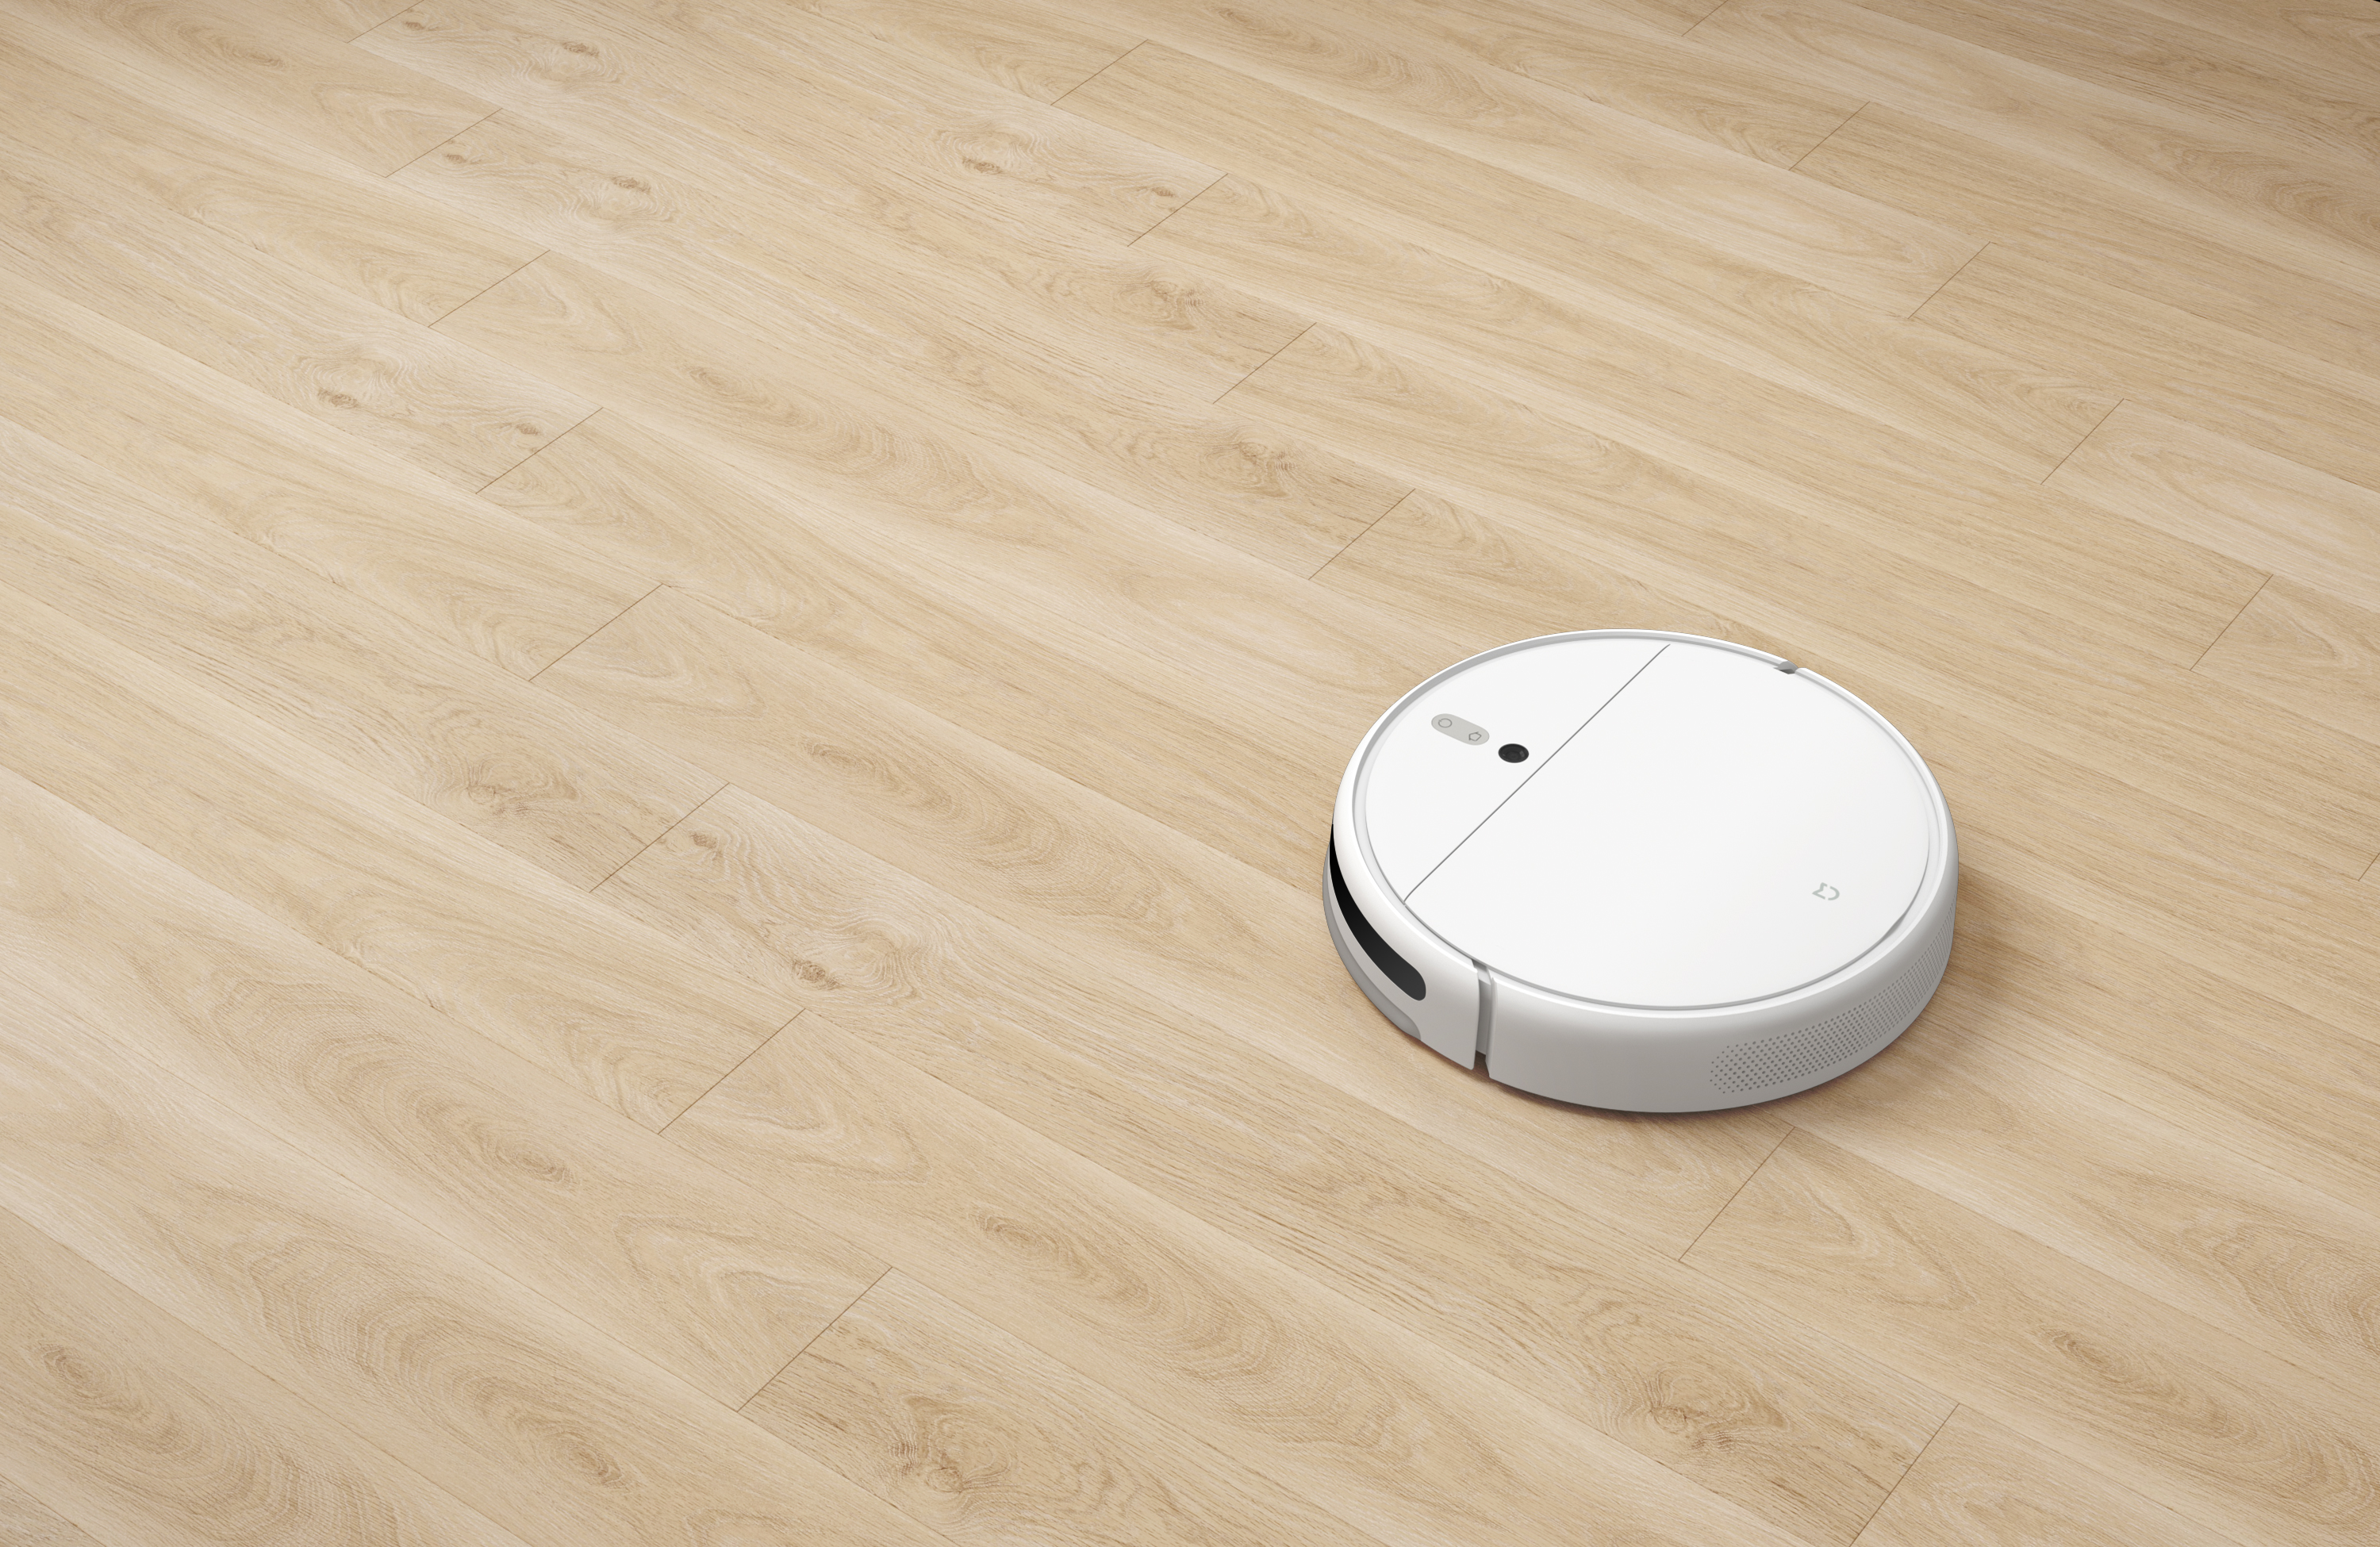 66 Xiaomi &Lt;Div Id=&Quot;Product-Description-Short-979&Quot; Class=&Quot;Product-Description-Short&Quot;&Gt; Unique Robotic Vacuum Cleaner For A Great Price, Wet And Dry Cleaning, Wi-Fi Connection, Vslam Route Planning, Suction Power Up To 2500 Pa, Application Control, Hepa Filter And Much More. Https://Youtu.be/Ychdmp-Pa7O &Lt;/Div&Gt;